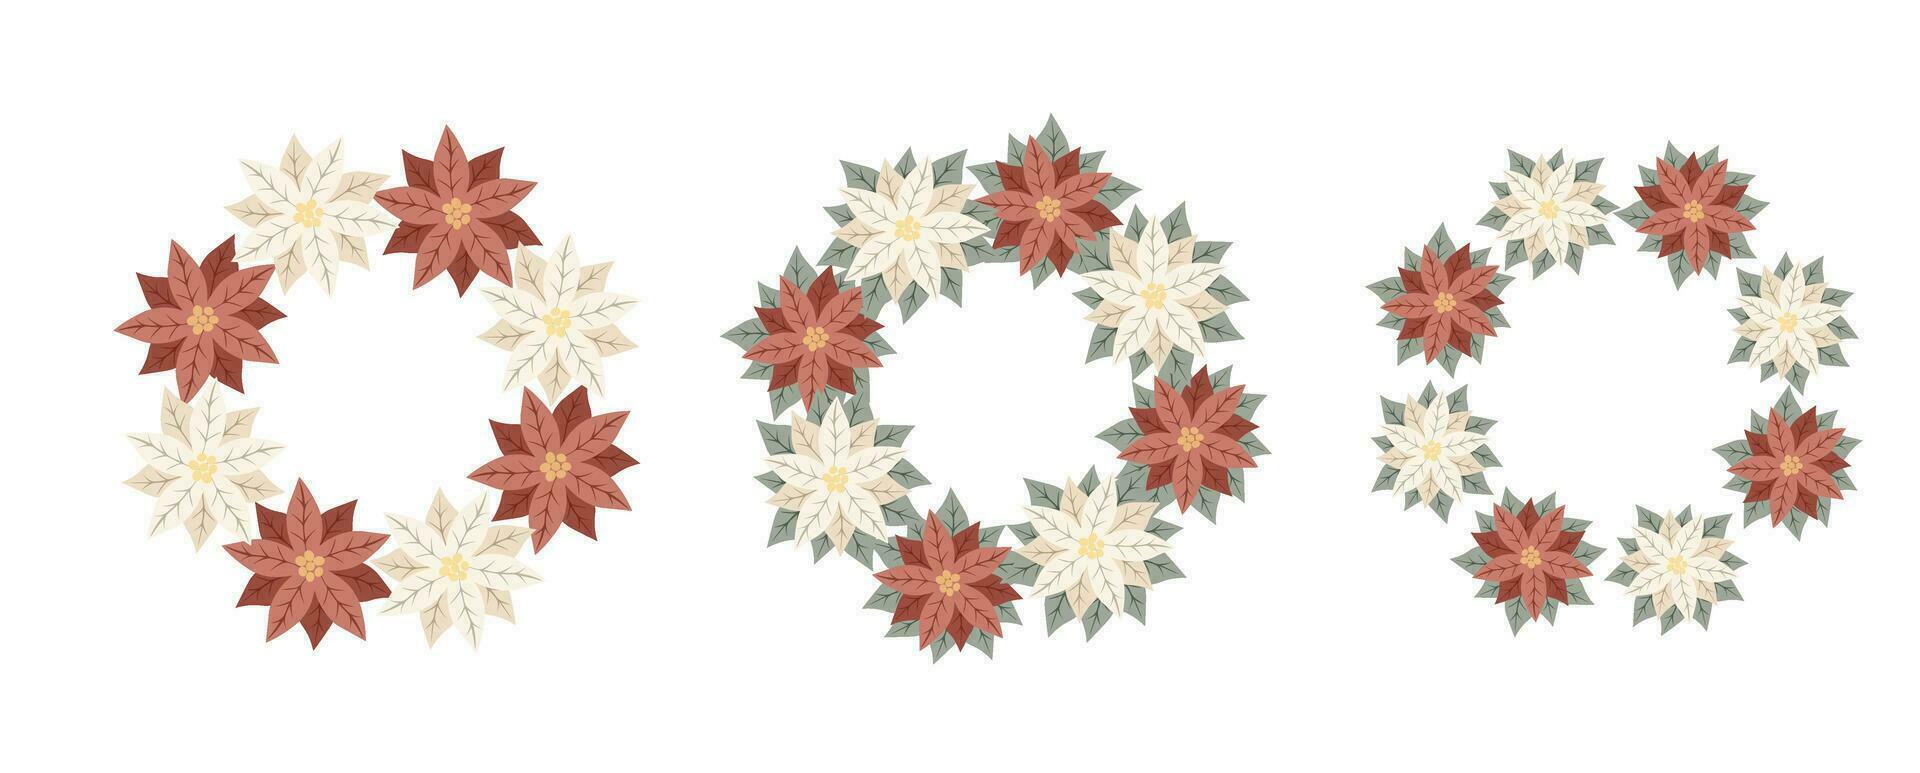 Christmas wreaths with white and red poinsettia. Design for New Year and Christmas cards, scrapbooking, stickers, planner, invitations vector